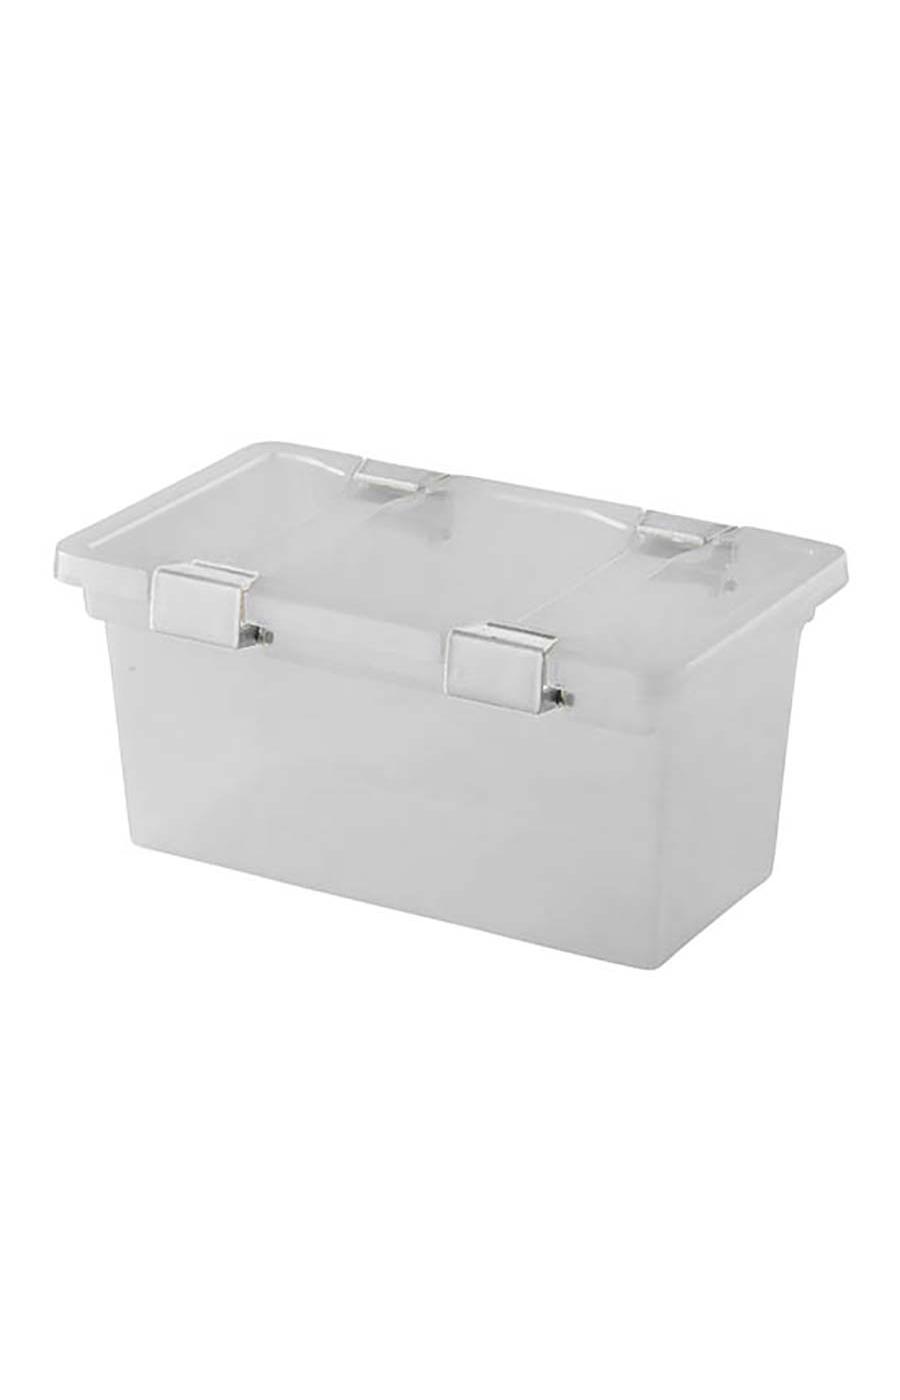 Hemisphere Trading Storage Container with Lid; image 2 of 2